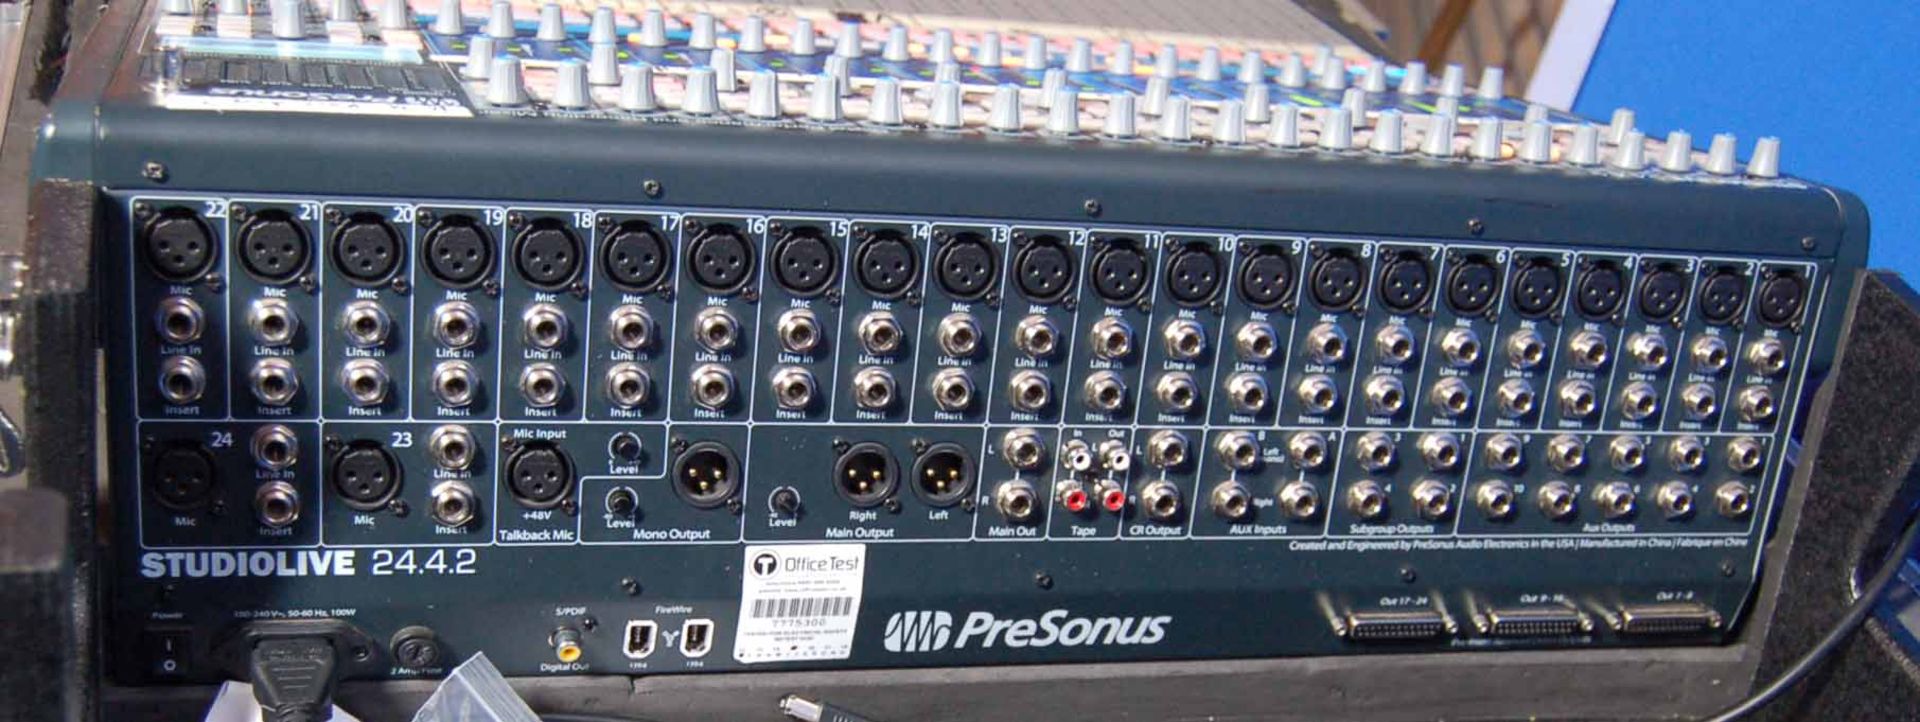 A PRESONUS Studio Live 24 4.2 Mixing Desk, 24-Channel, Four BVS, DV25 Outputs in GATOR Carry Case - Image 2 of 5